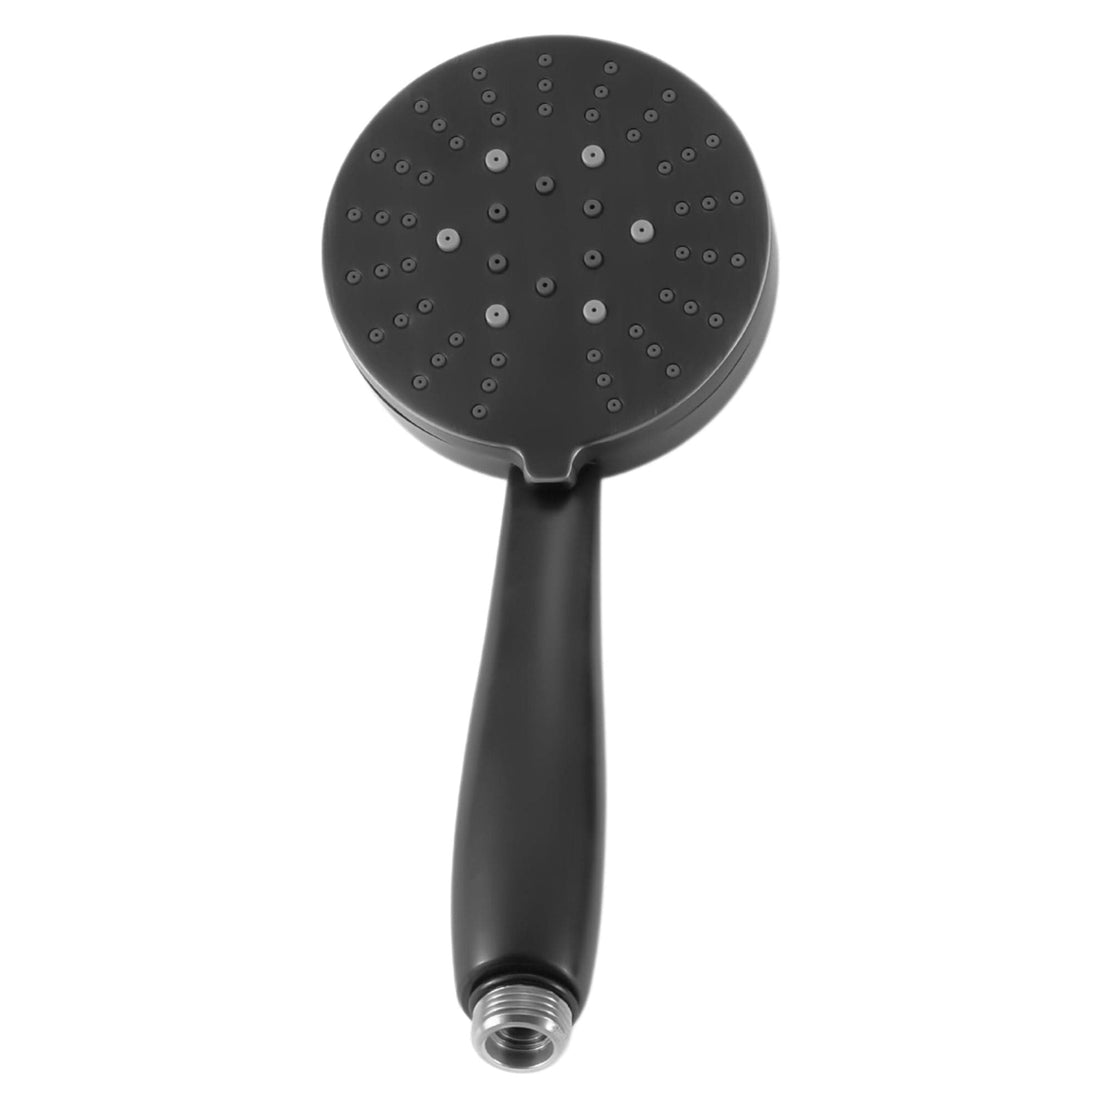 (Main Matte Black) All Metal 3 Spray Handheld Shower Head, 4 Inch Spray Wand, No Flow Restrictor Made from 304 Stainless Steel with Silicone Nozzles Works With All Hoses, Slide Bars & Wall Mount Holders - The Shower Head Store